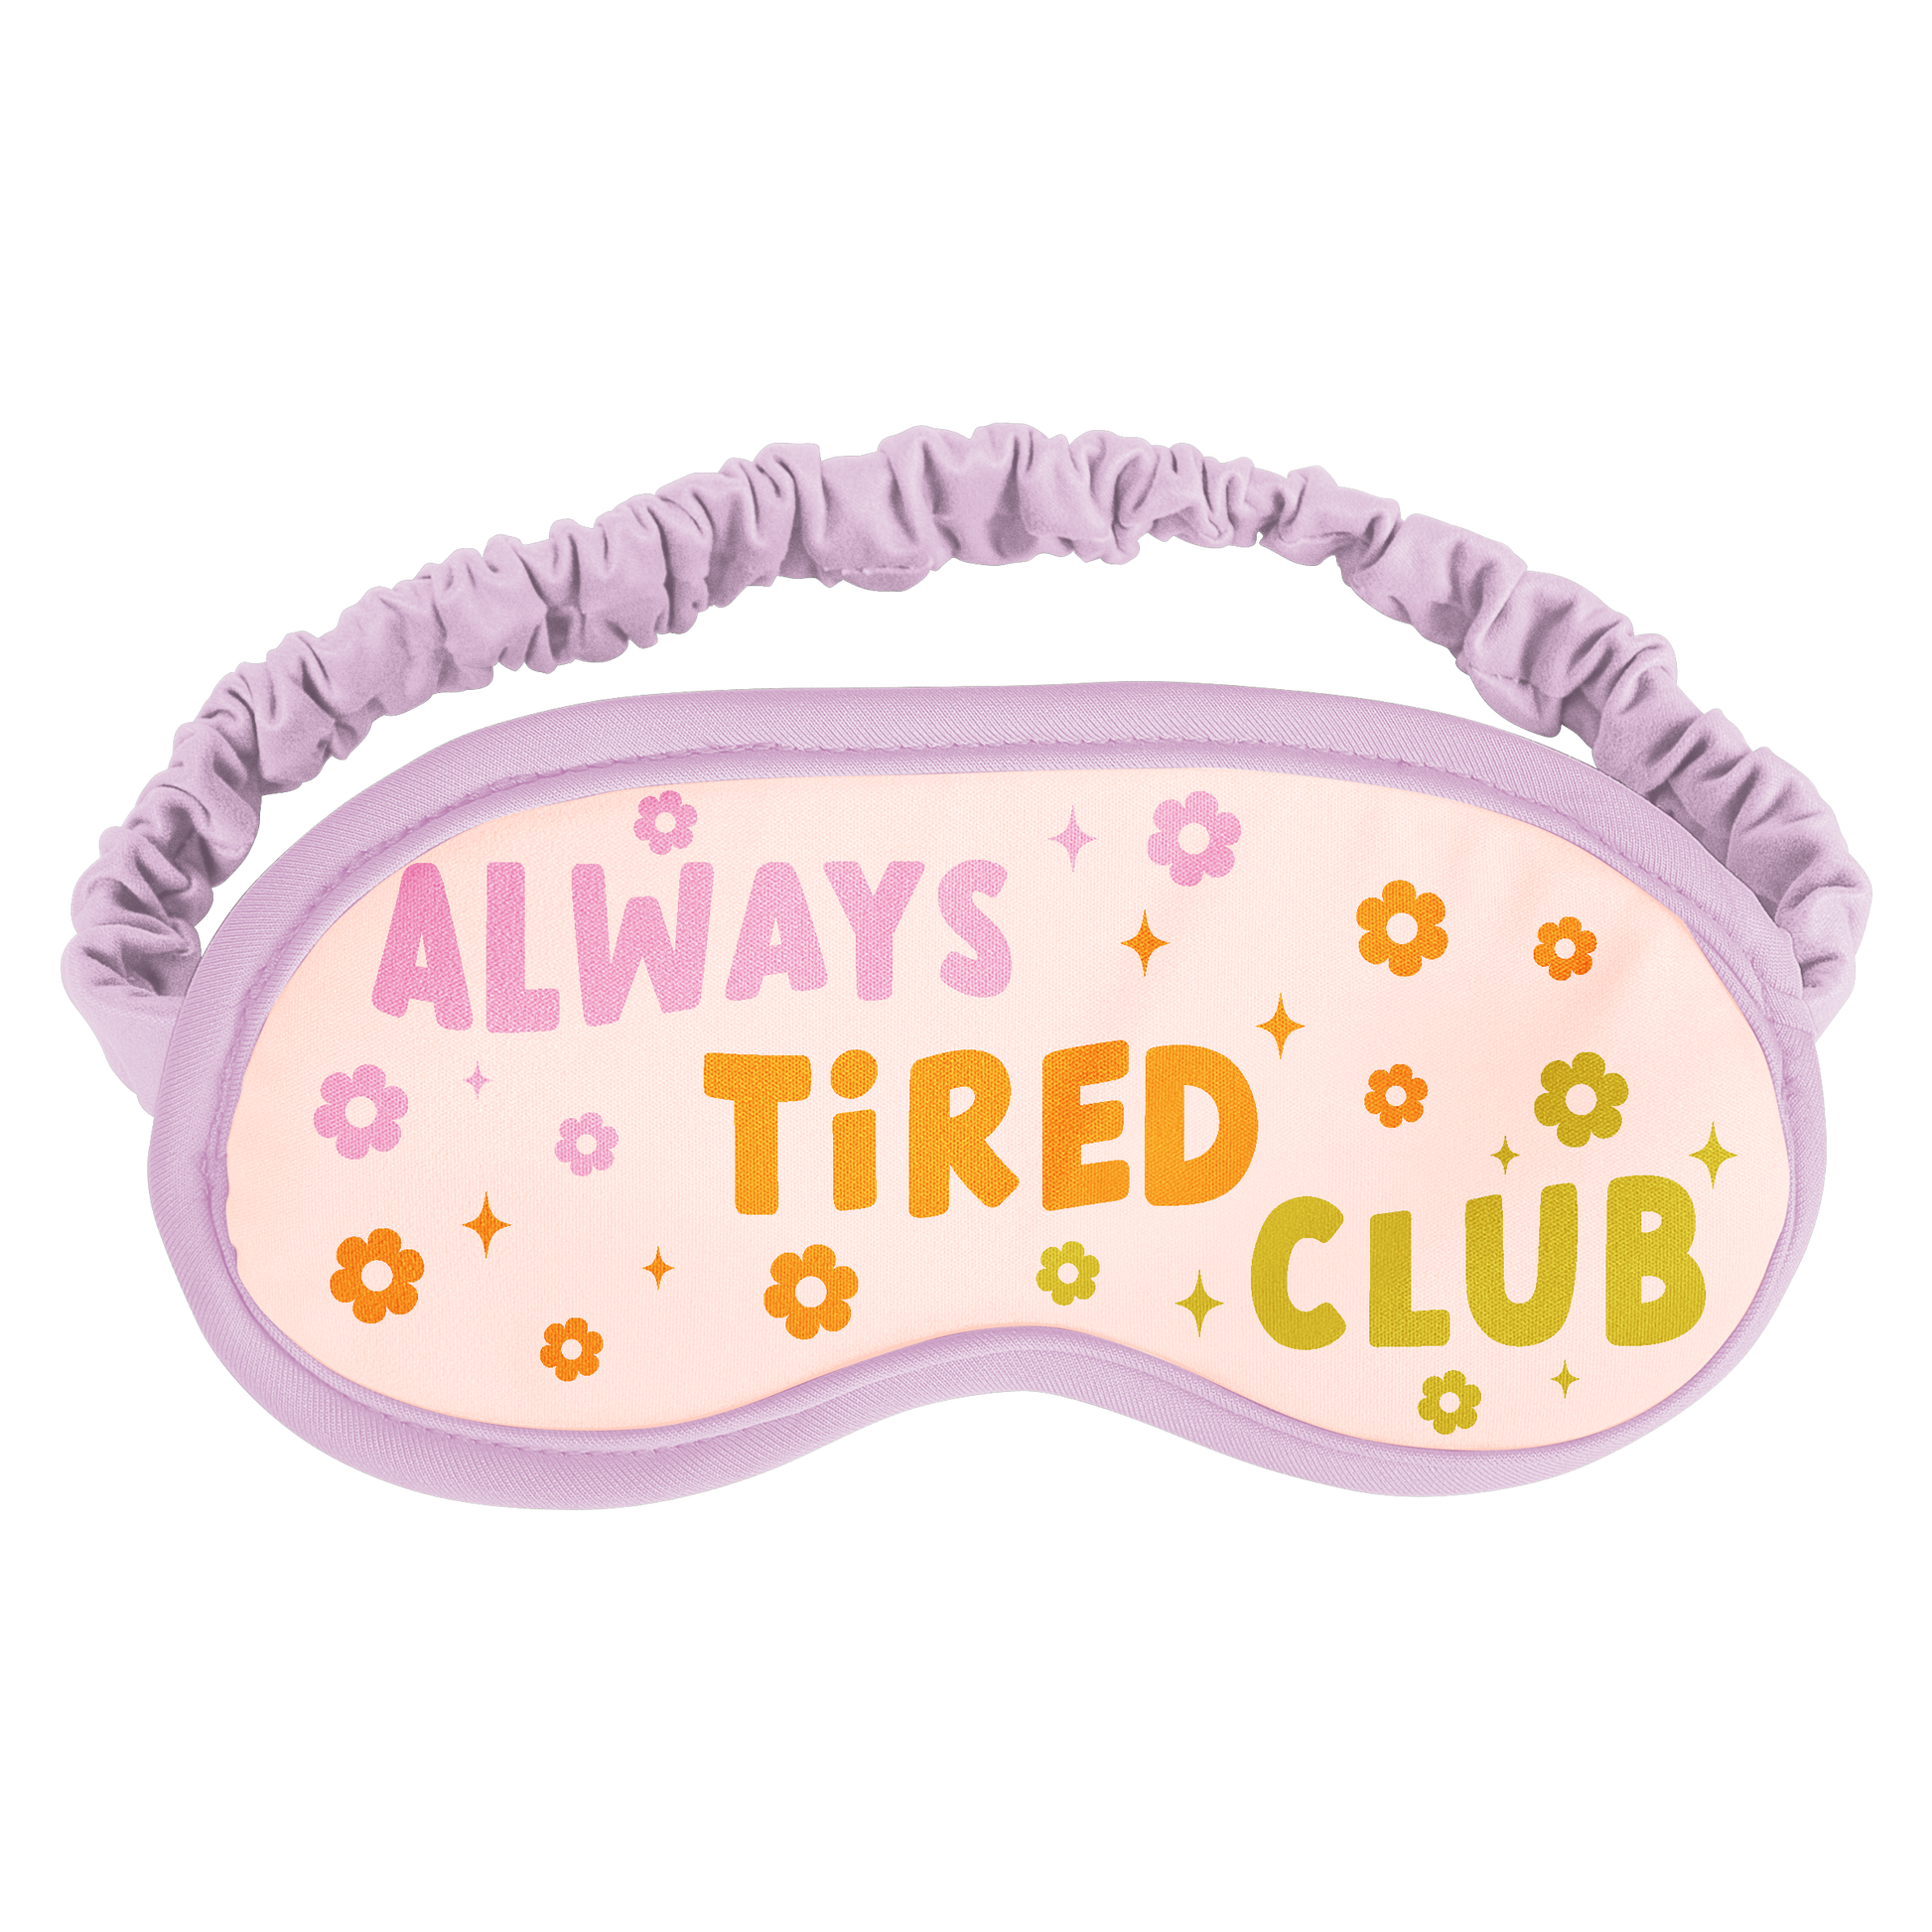 purple sleeping mask with "always tired club" message and groovy floral design